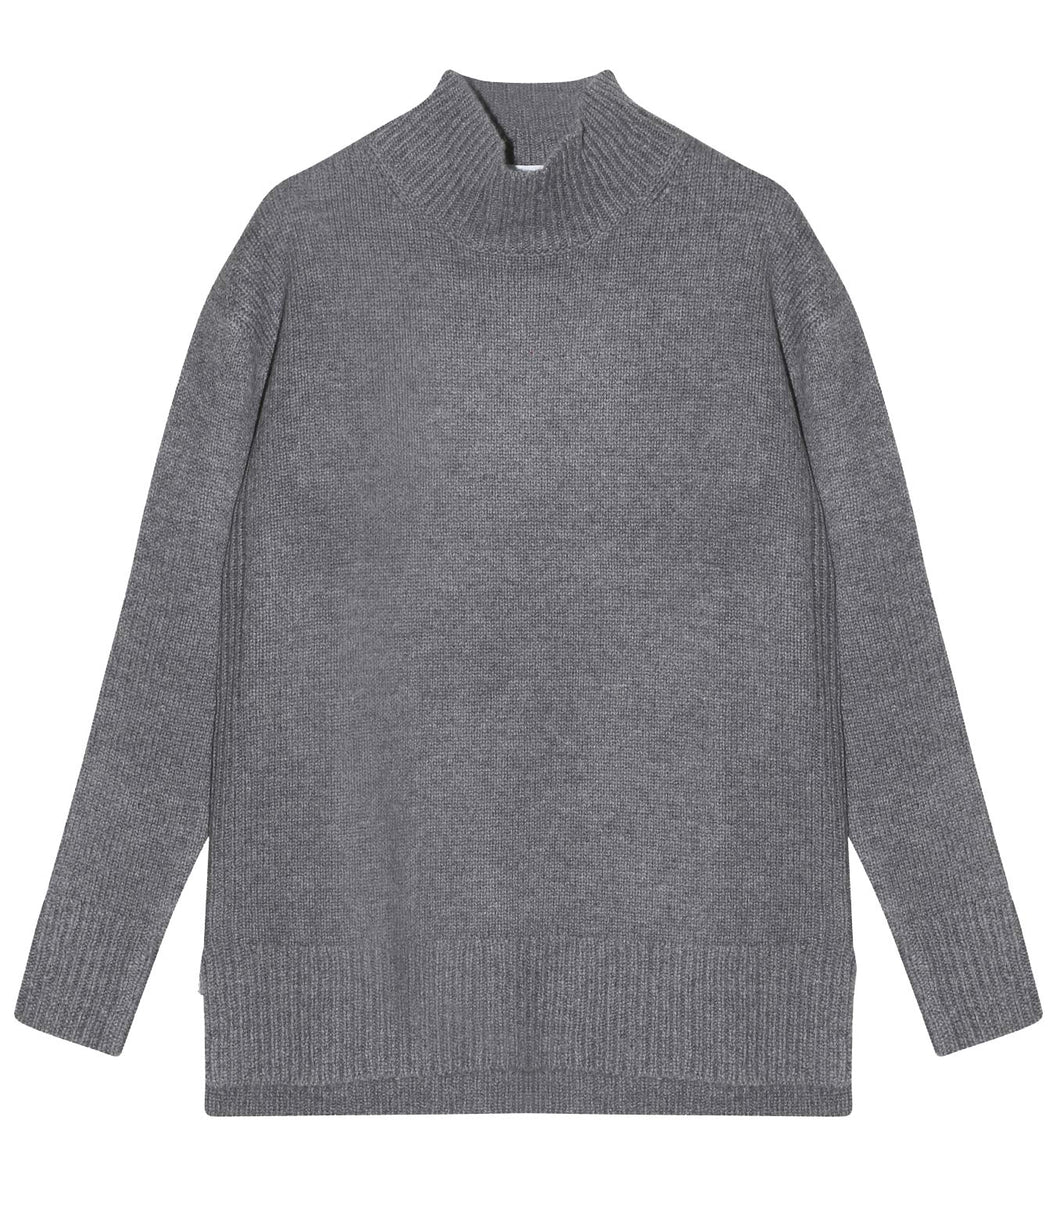 engage cashmere jumper stand-up collar